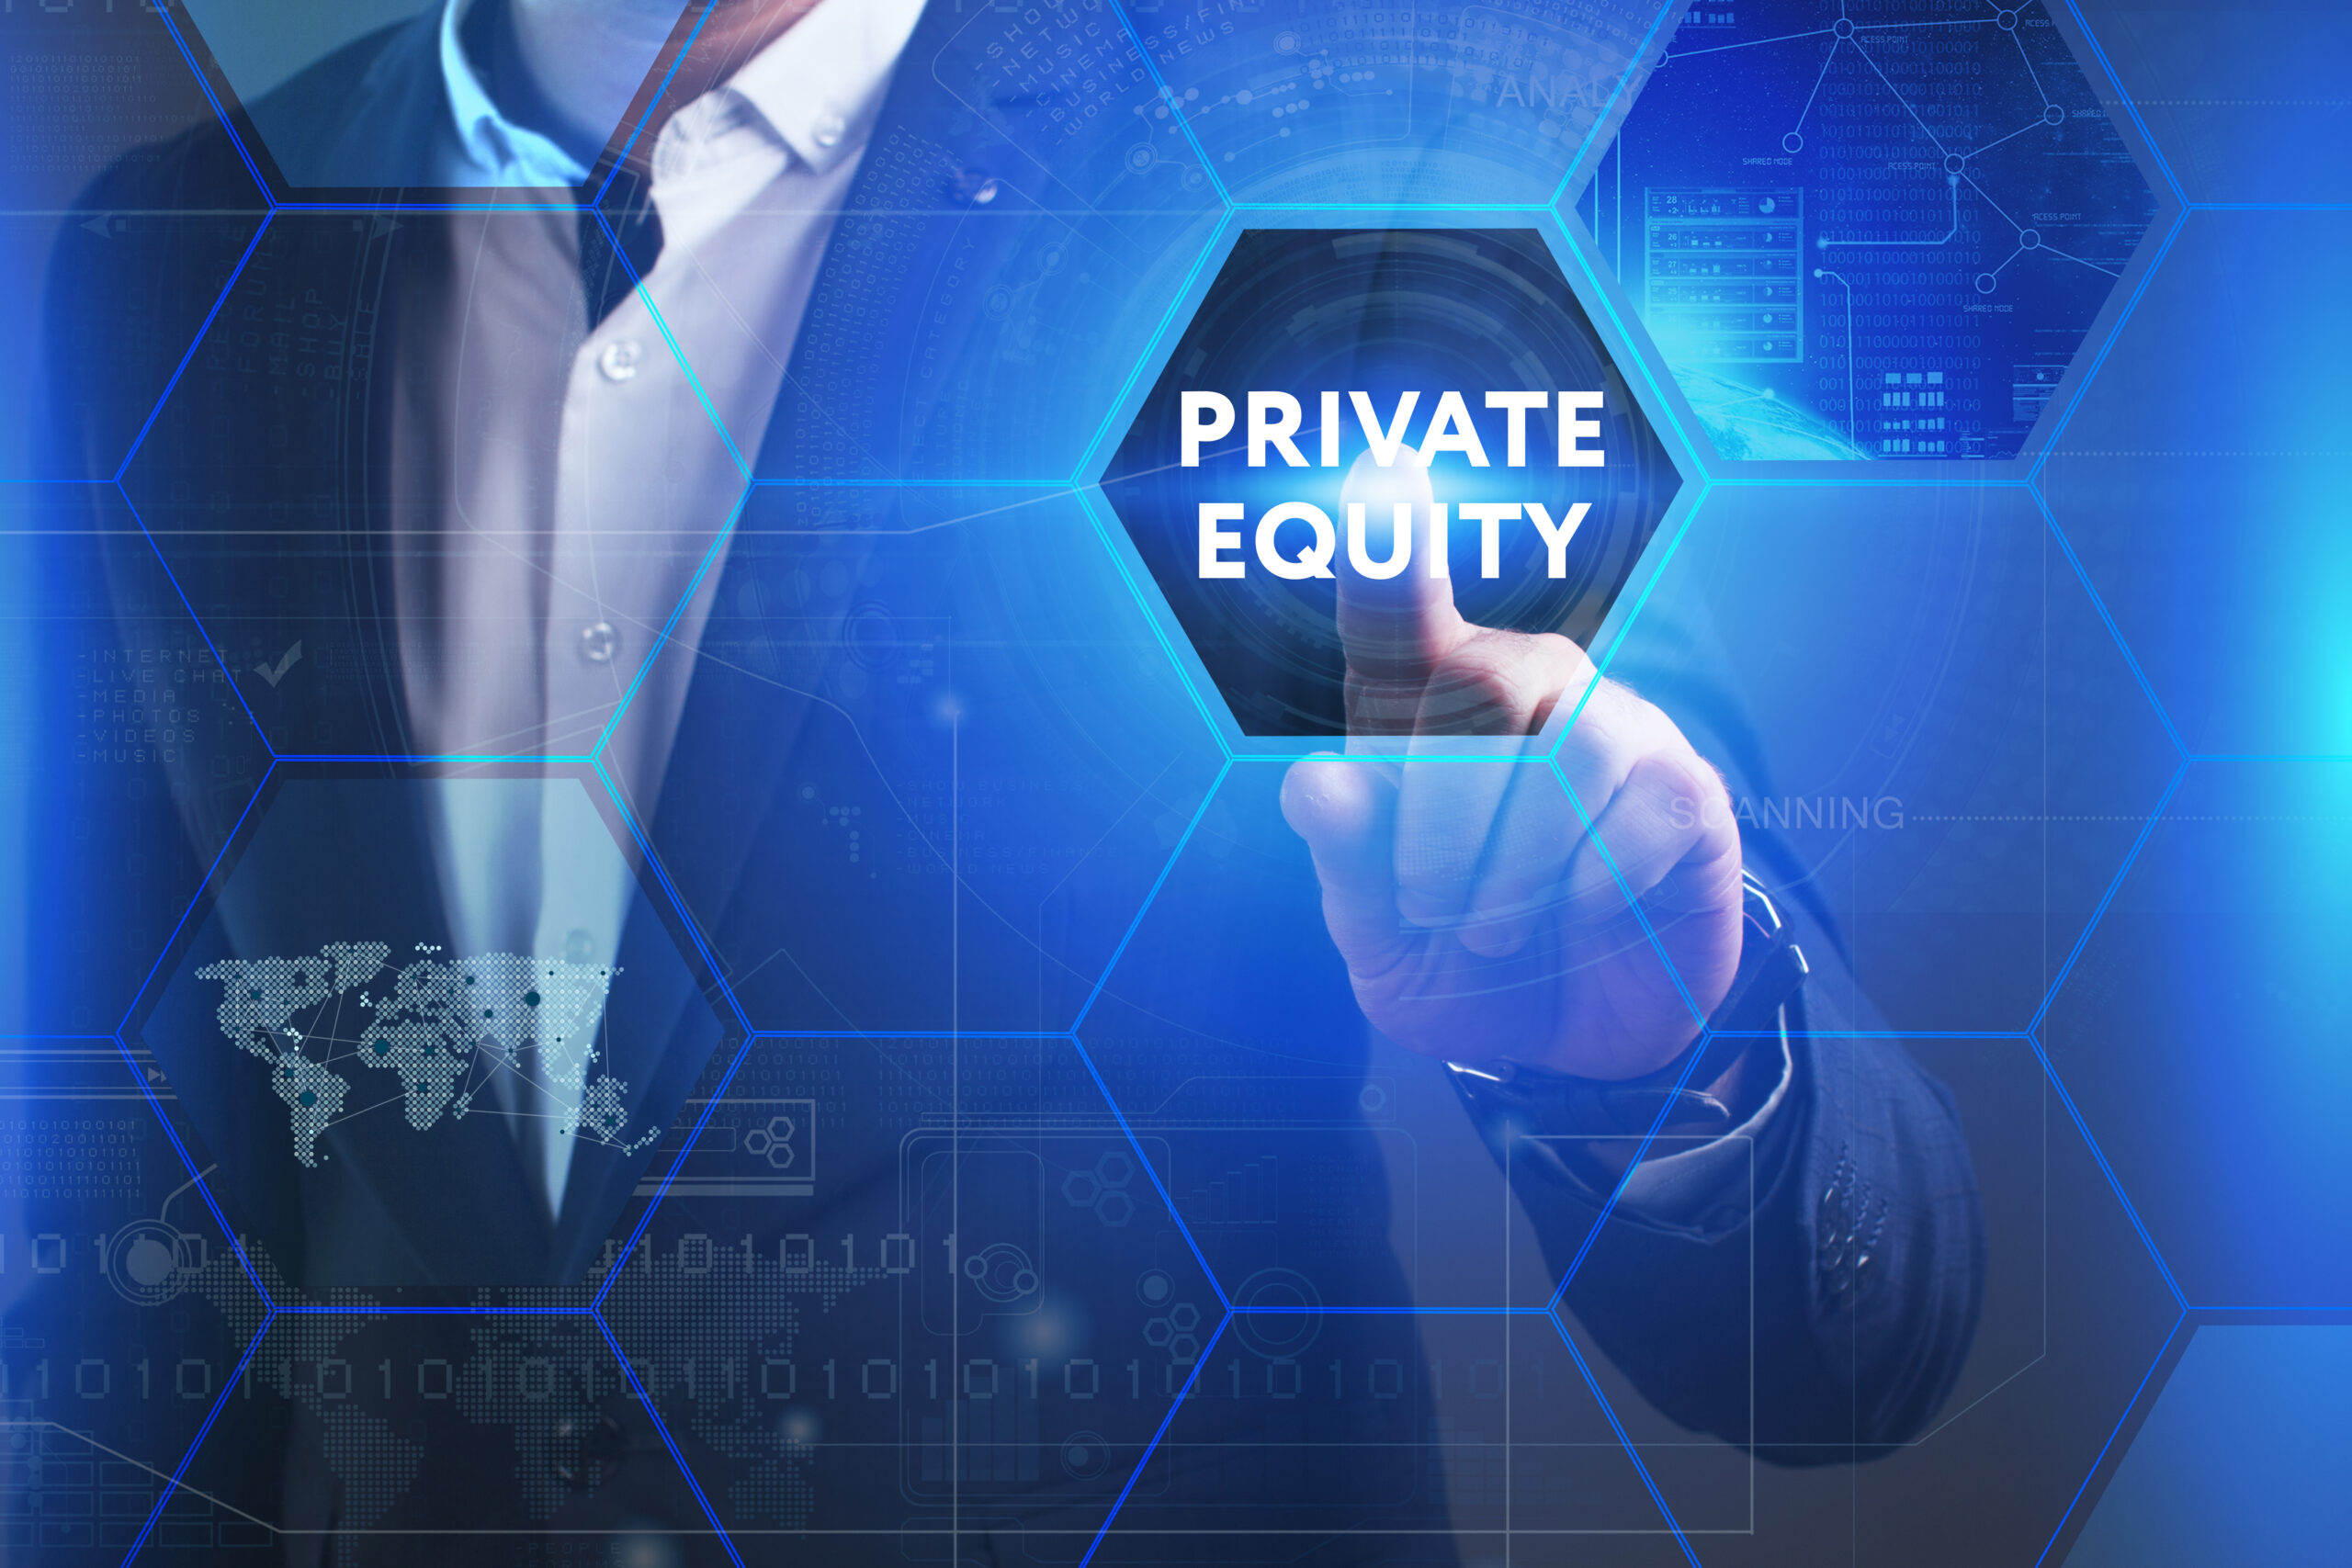 Text showing the words "private equity" is shown in front of a man in a suit.